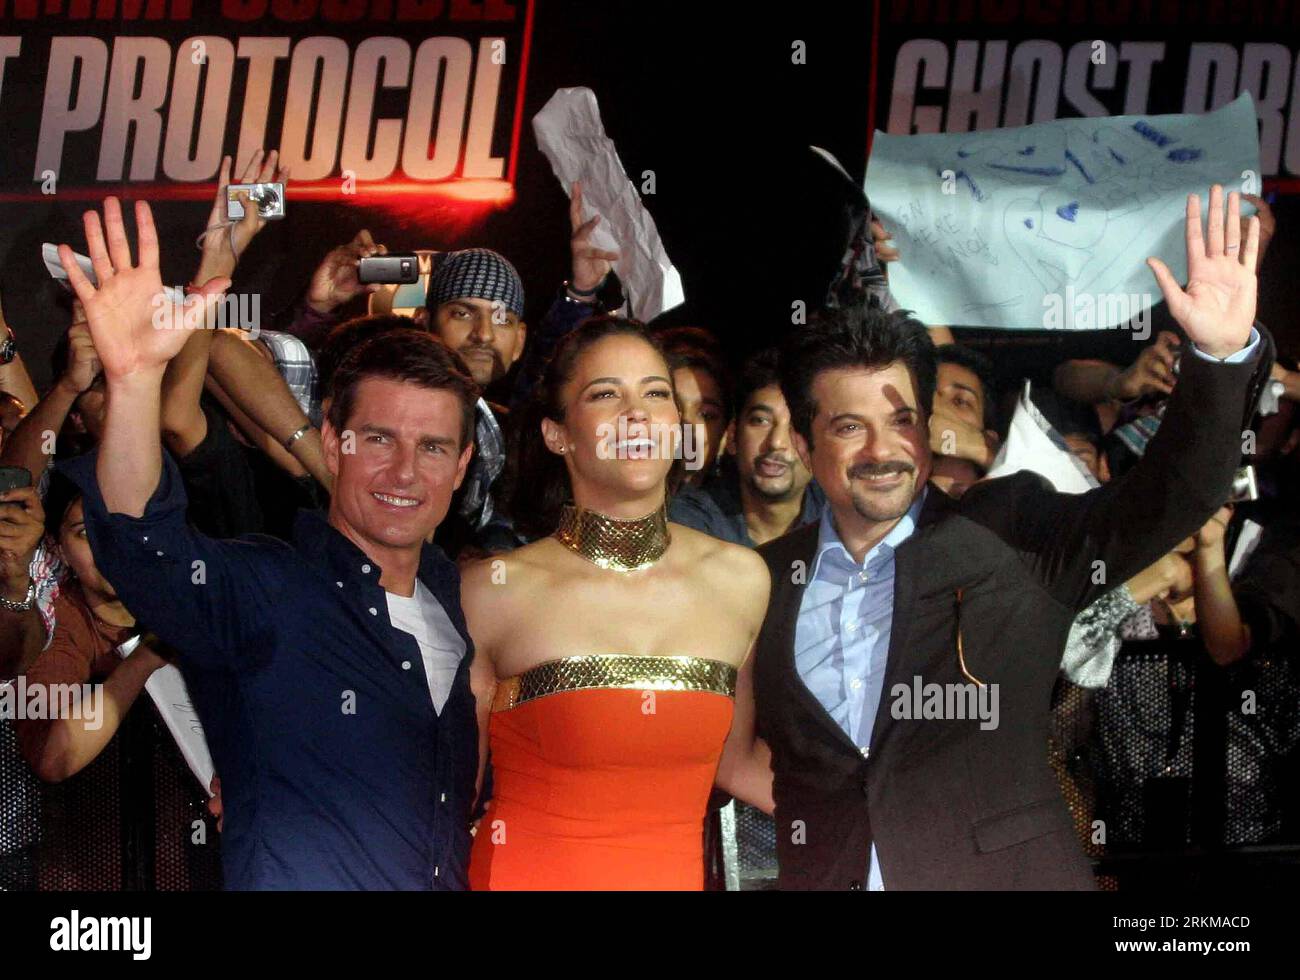 Bildnummer: 56623114  Datum: 04.12.2011  Copyright: imago/Xinhua (111205) -- Mumbai, Dec. 5, 2011 (Xinhua) -- Actor Tom Cruise (L) poses with co-actors Paula Patton (C) and Anil Kapoor before a special screening of their upcoming film Mission Impossible: Ghost Protocol in Mumbai, India on December 4, 2011.(Xinhua) (dtf) INDIA-ENTERTAINMENT-US-CRUISE PUBLICATIONxNOTxINxCHN People Entertainment Film x0x xst 2011 quer premiumd      56623114 Date 04 12 2011 Copyright Imago XINHUA  Mumbai DEC 5 2011 XINHUA Actor Tom Cruise l Poses With Co Actors Paula Patton C and Anil Kapoor Before a Special Scree Stock Photo